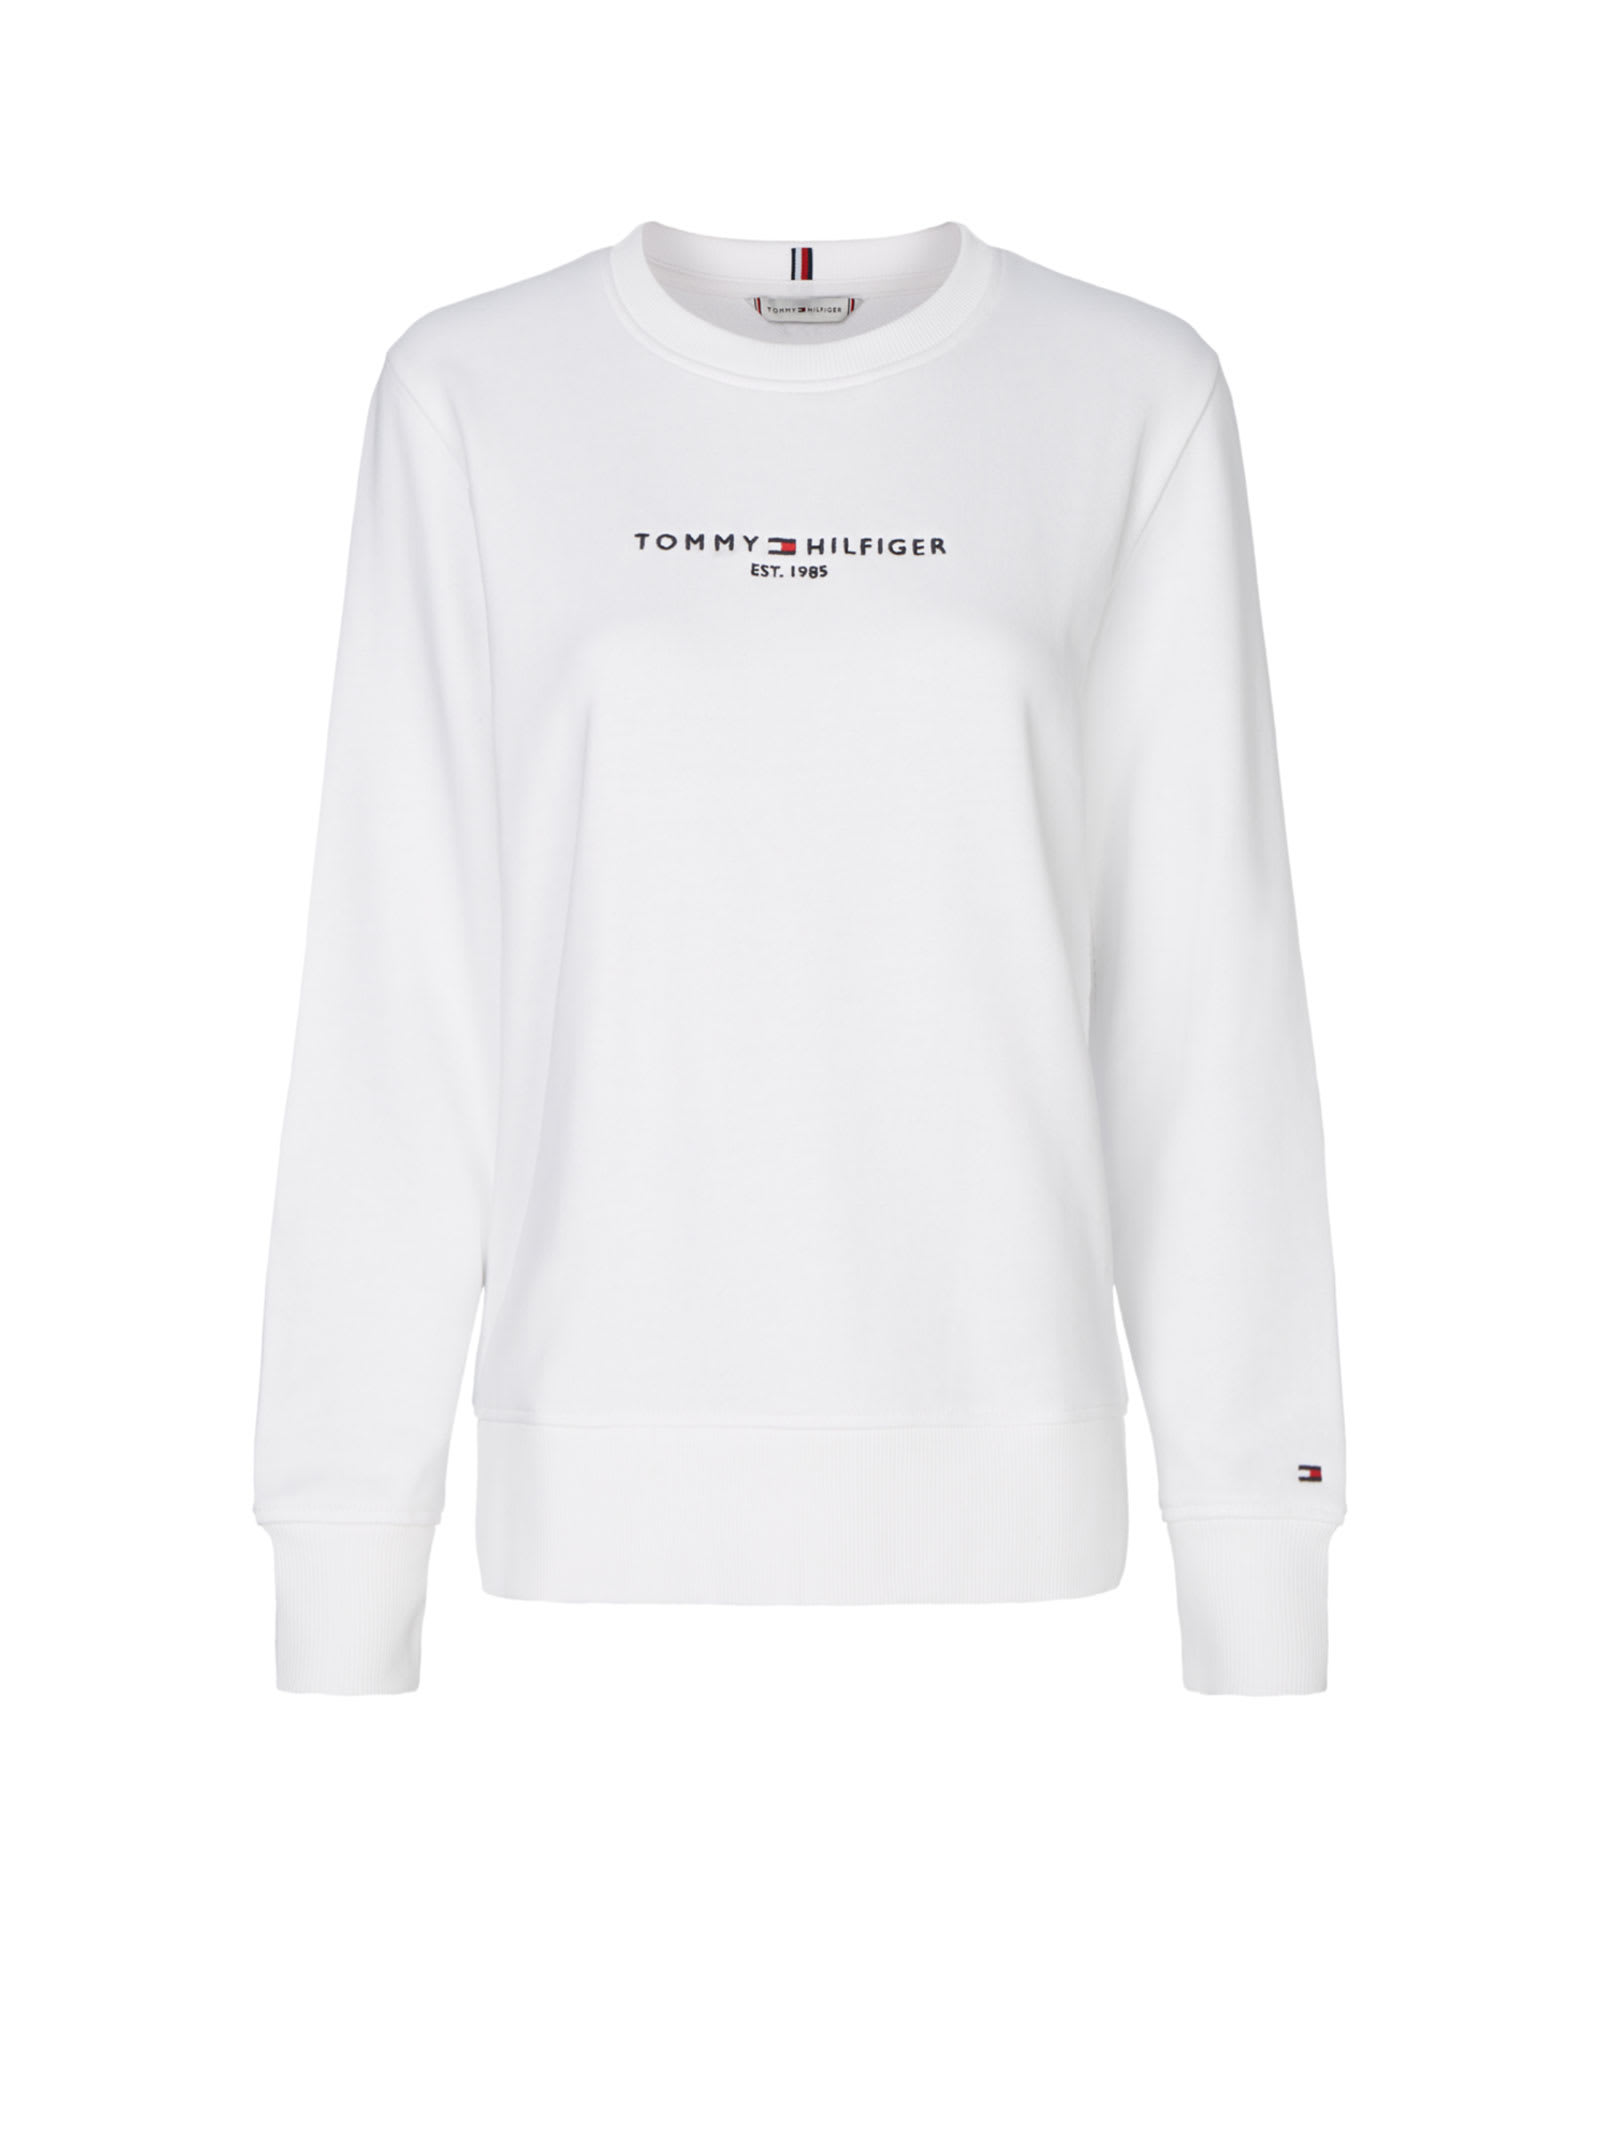 Tommy Hilfiger White Cotton Sweater With Logo